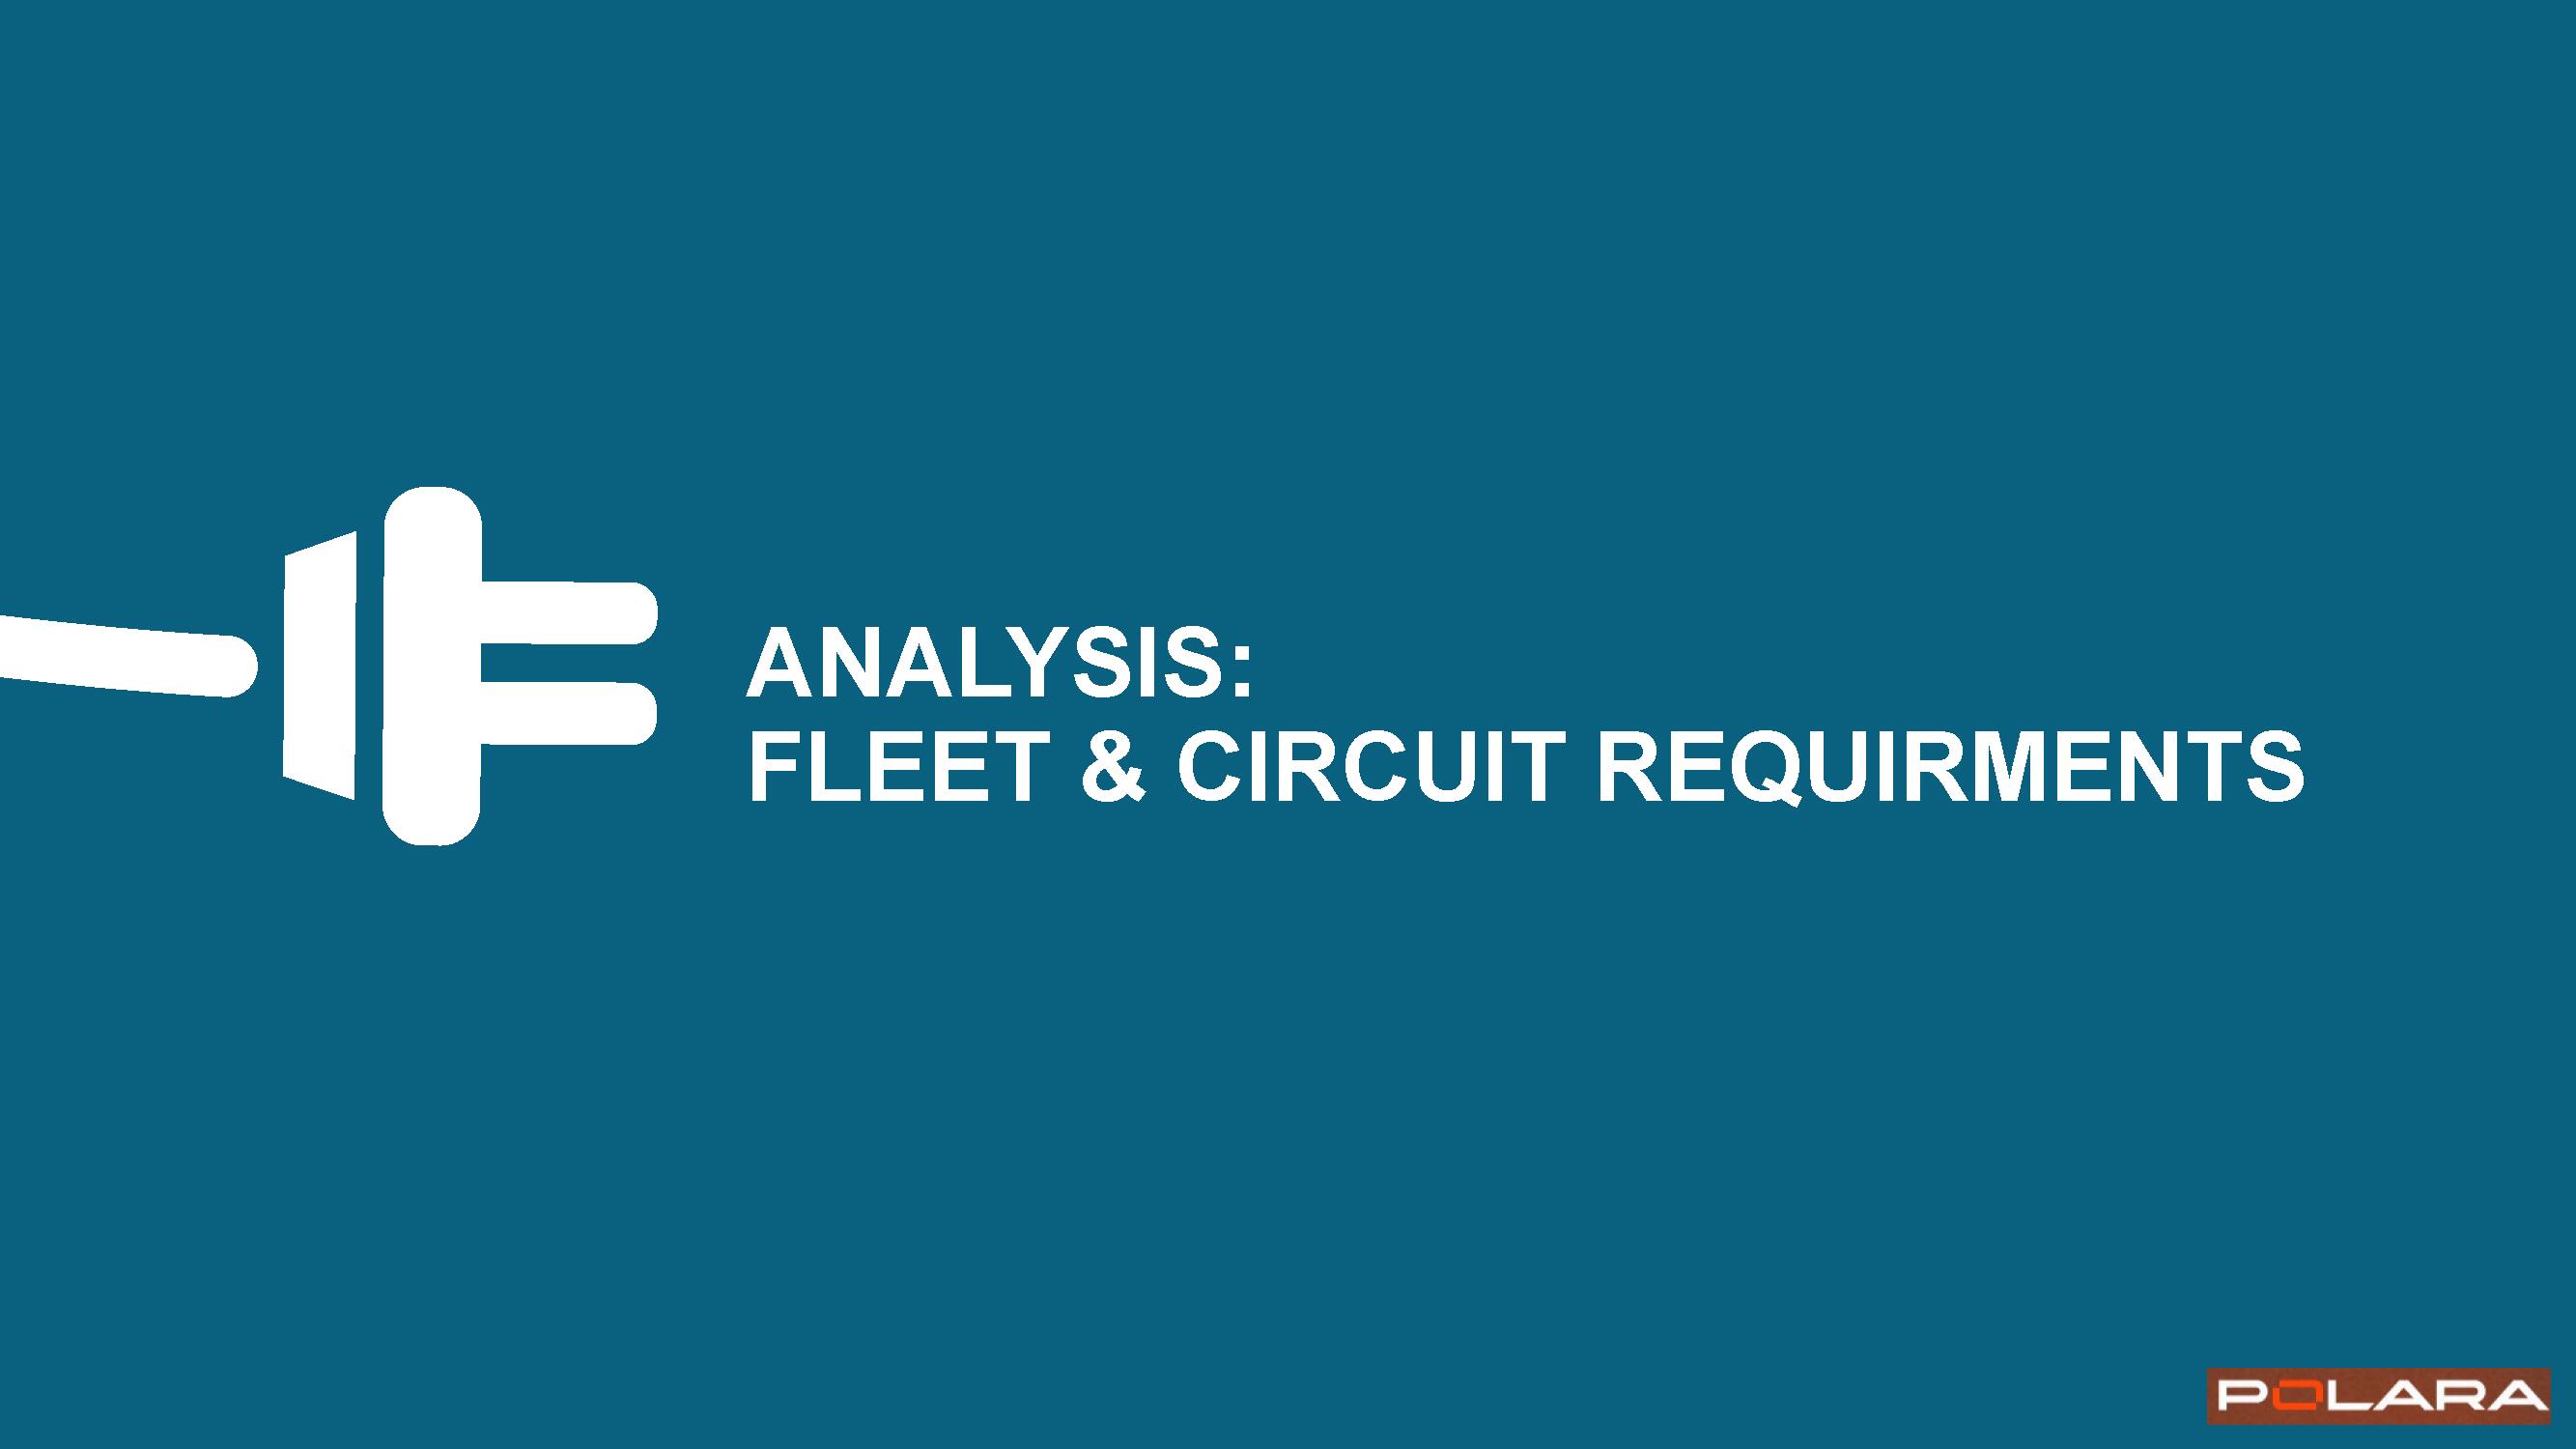 Fleet and Circuit Requirements